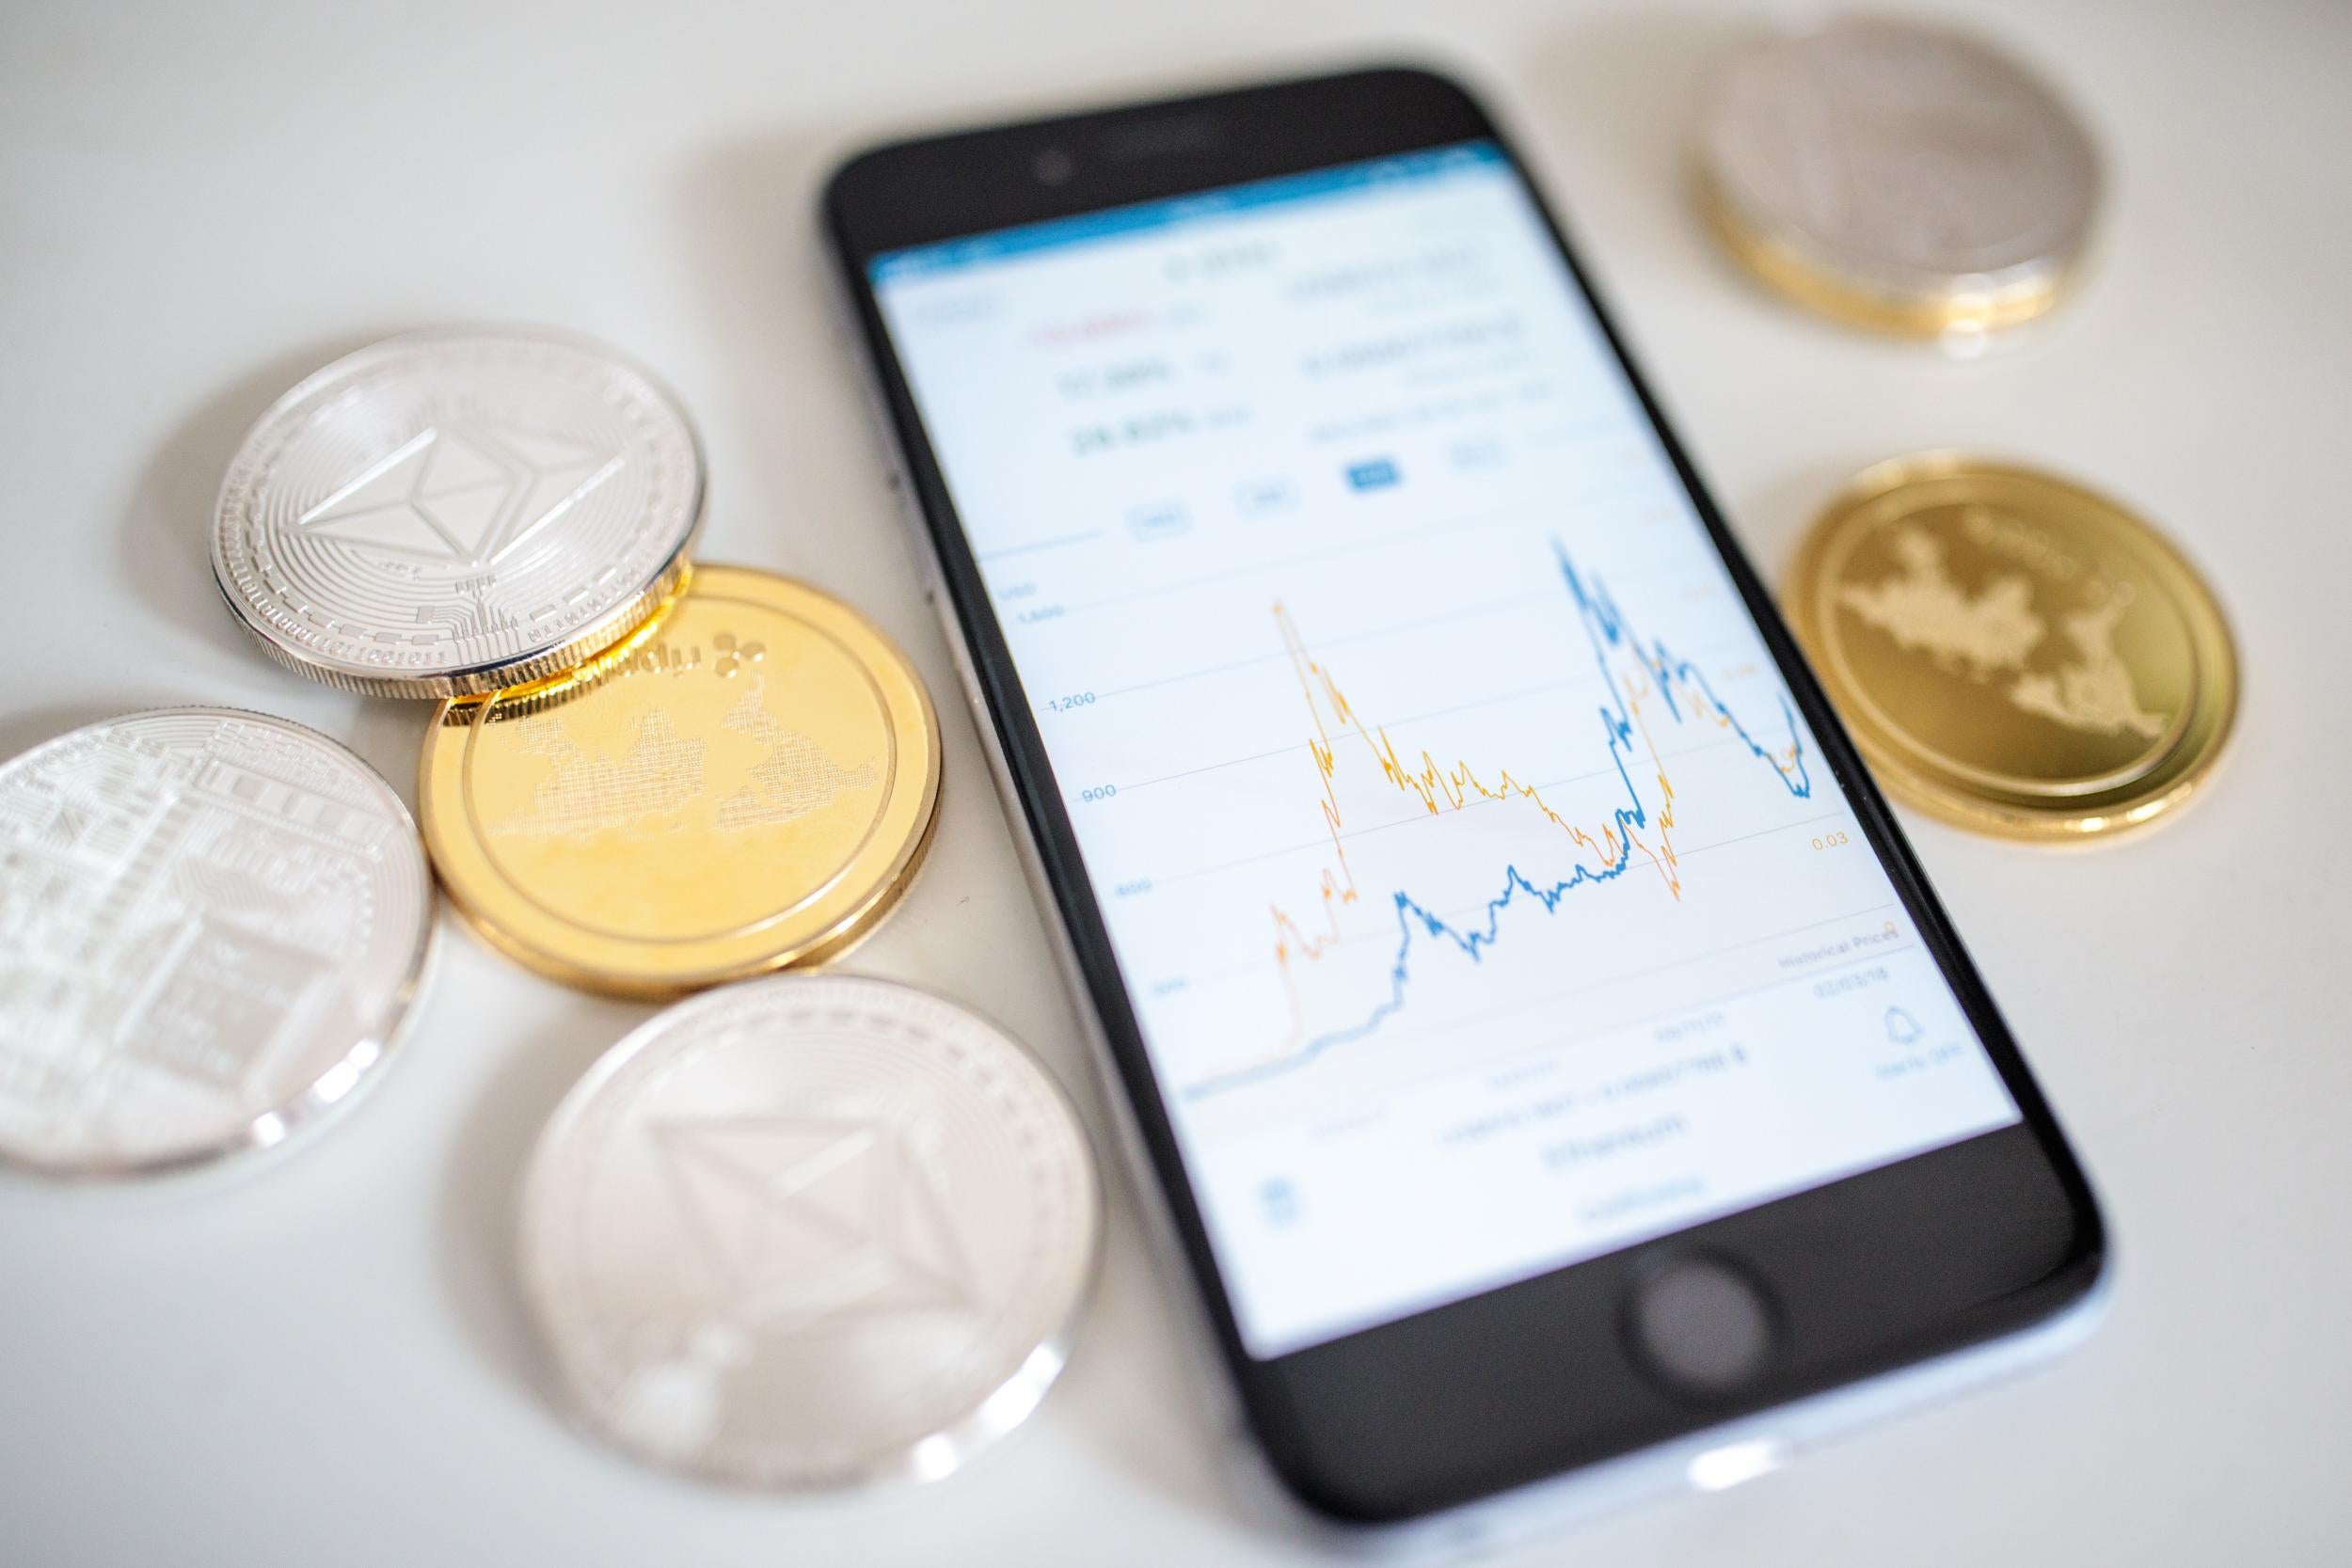 A smartphone displaying the current price chart for ethereum on April 25, 2018 in London, England. Cryptocurrency markets began to recover this month following a massive crash during the first quarter of 2018, seeing more than $550 billion wiped from the total market capitalisation.